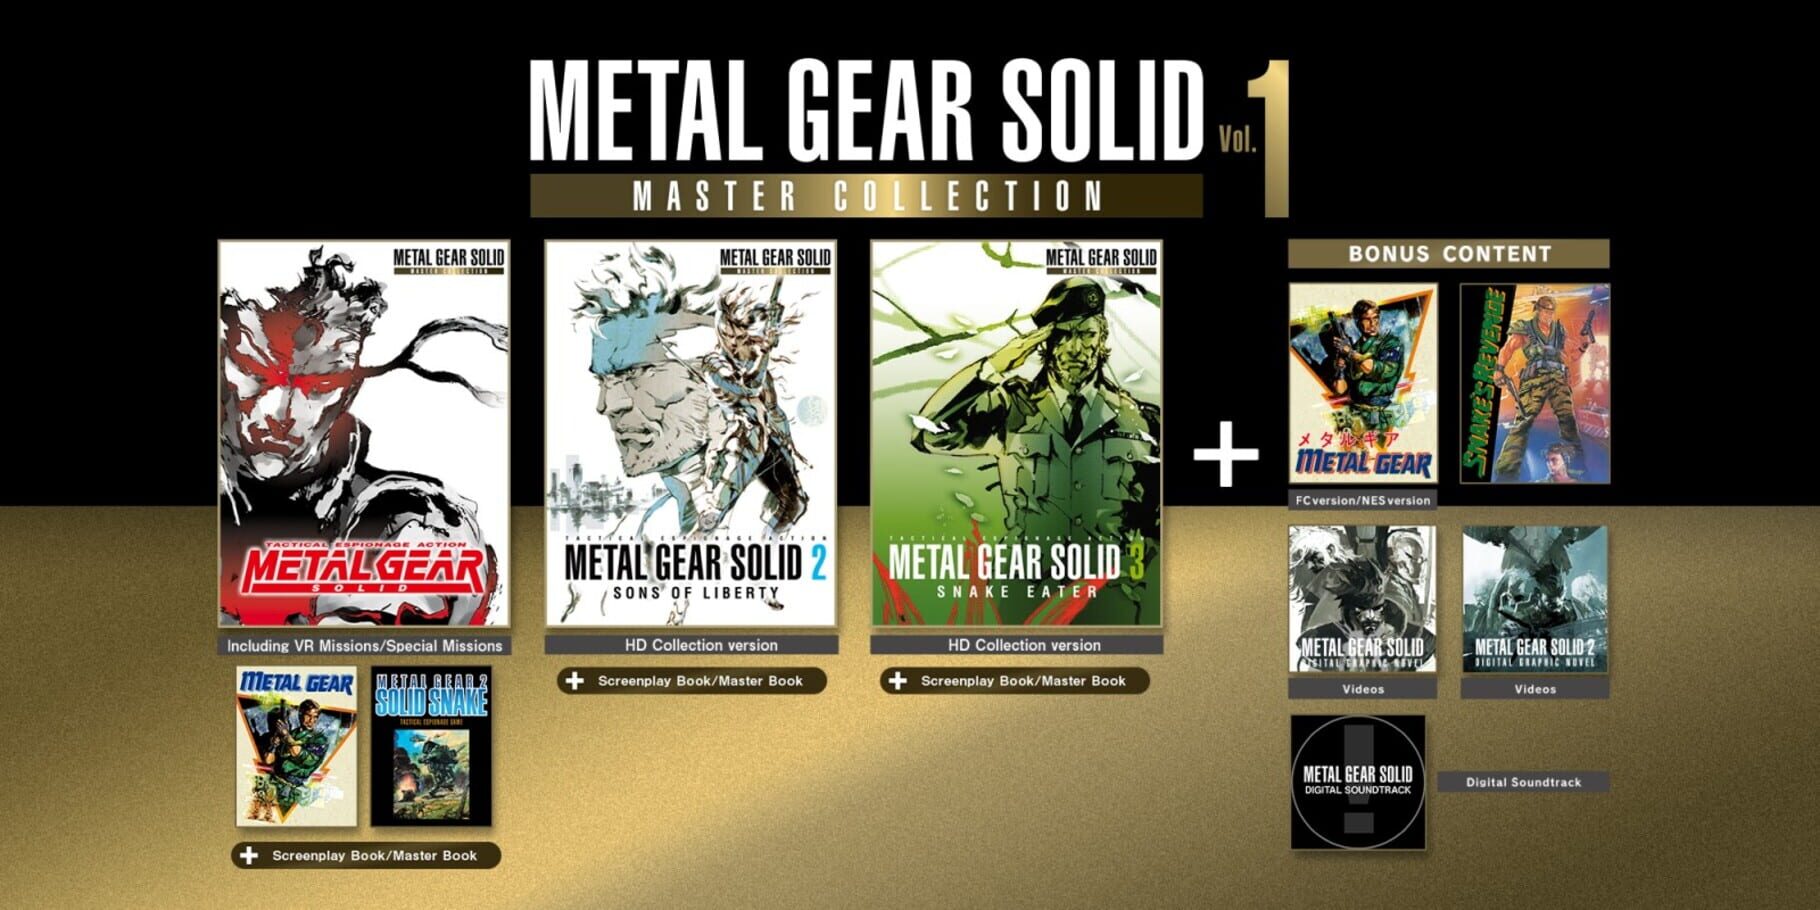 Arte - Metal Gear Solid Master Collection: Volume 1